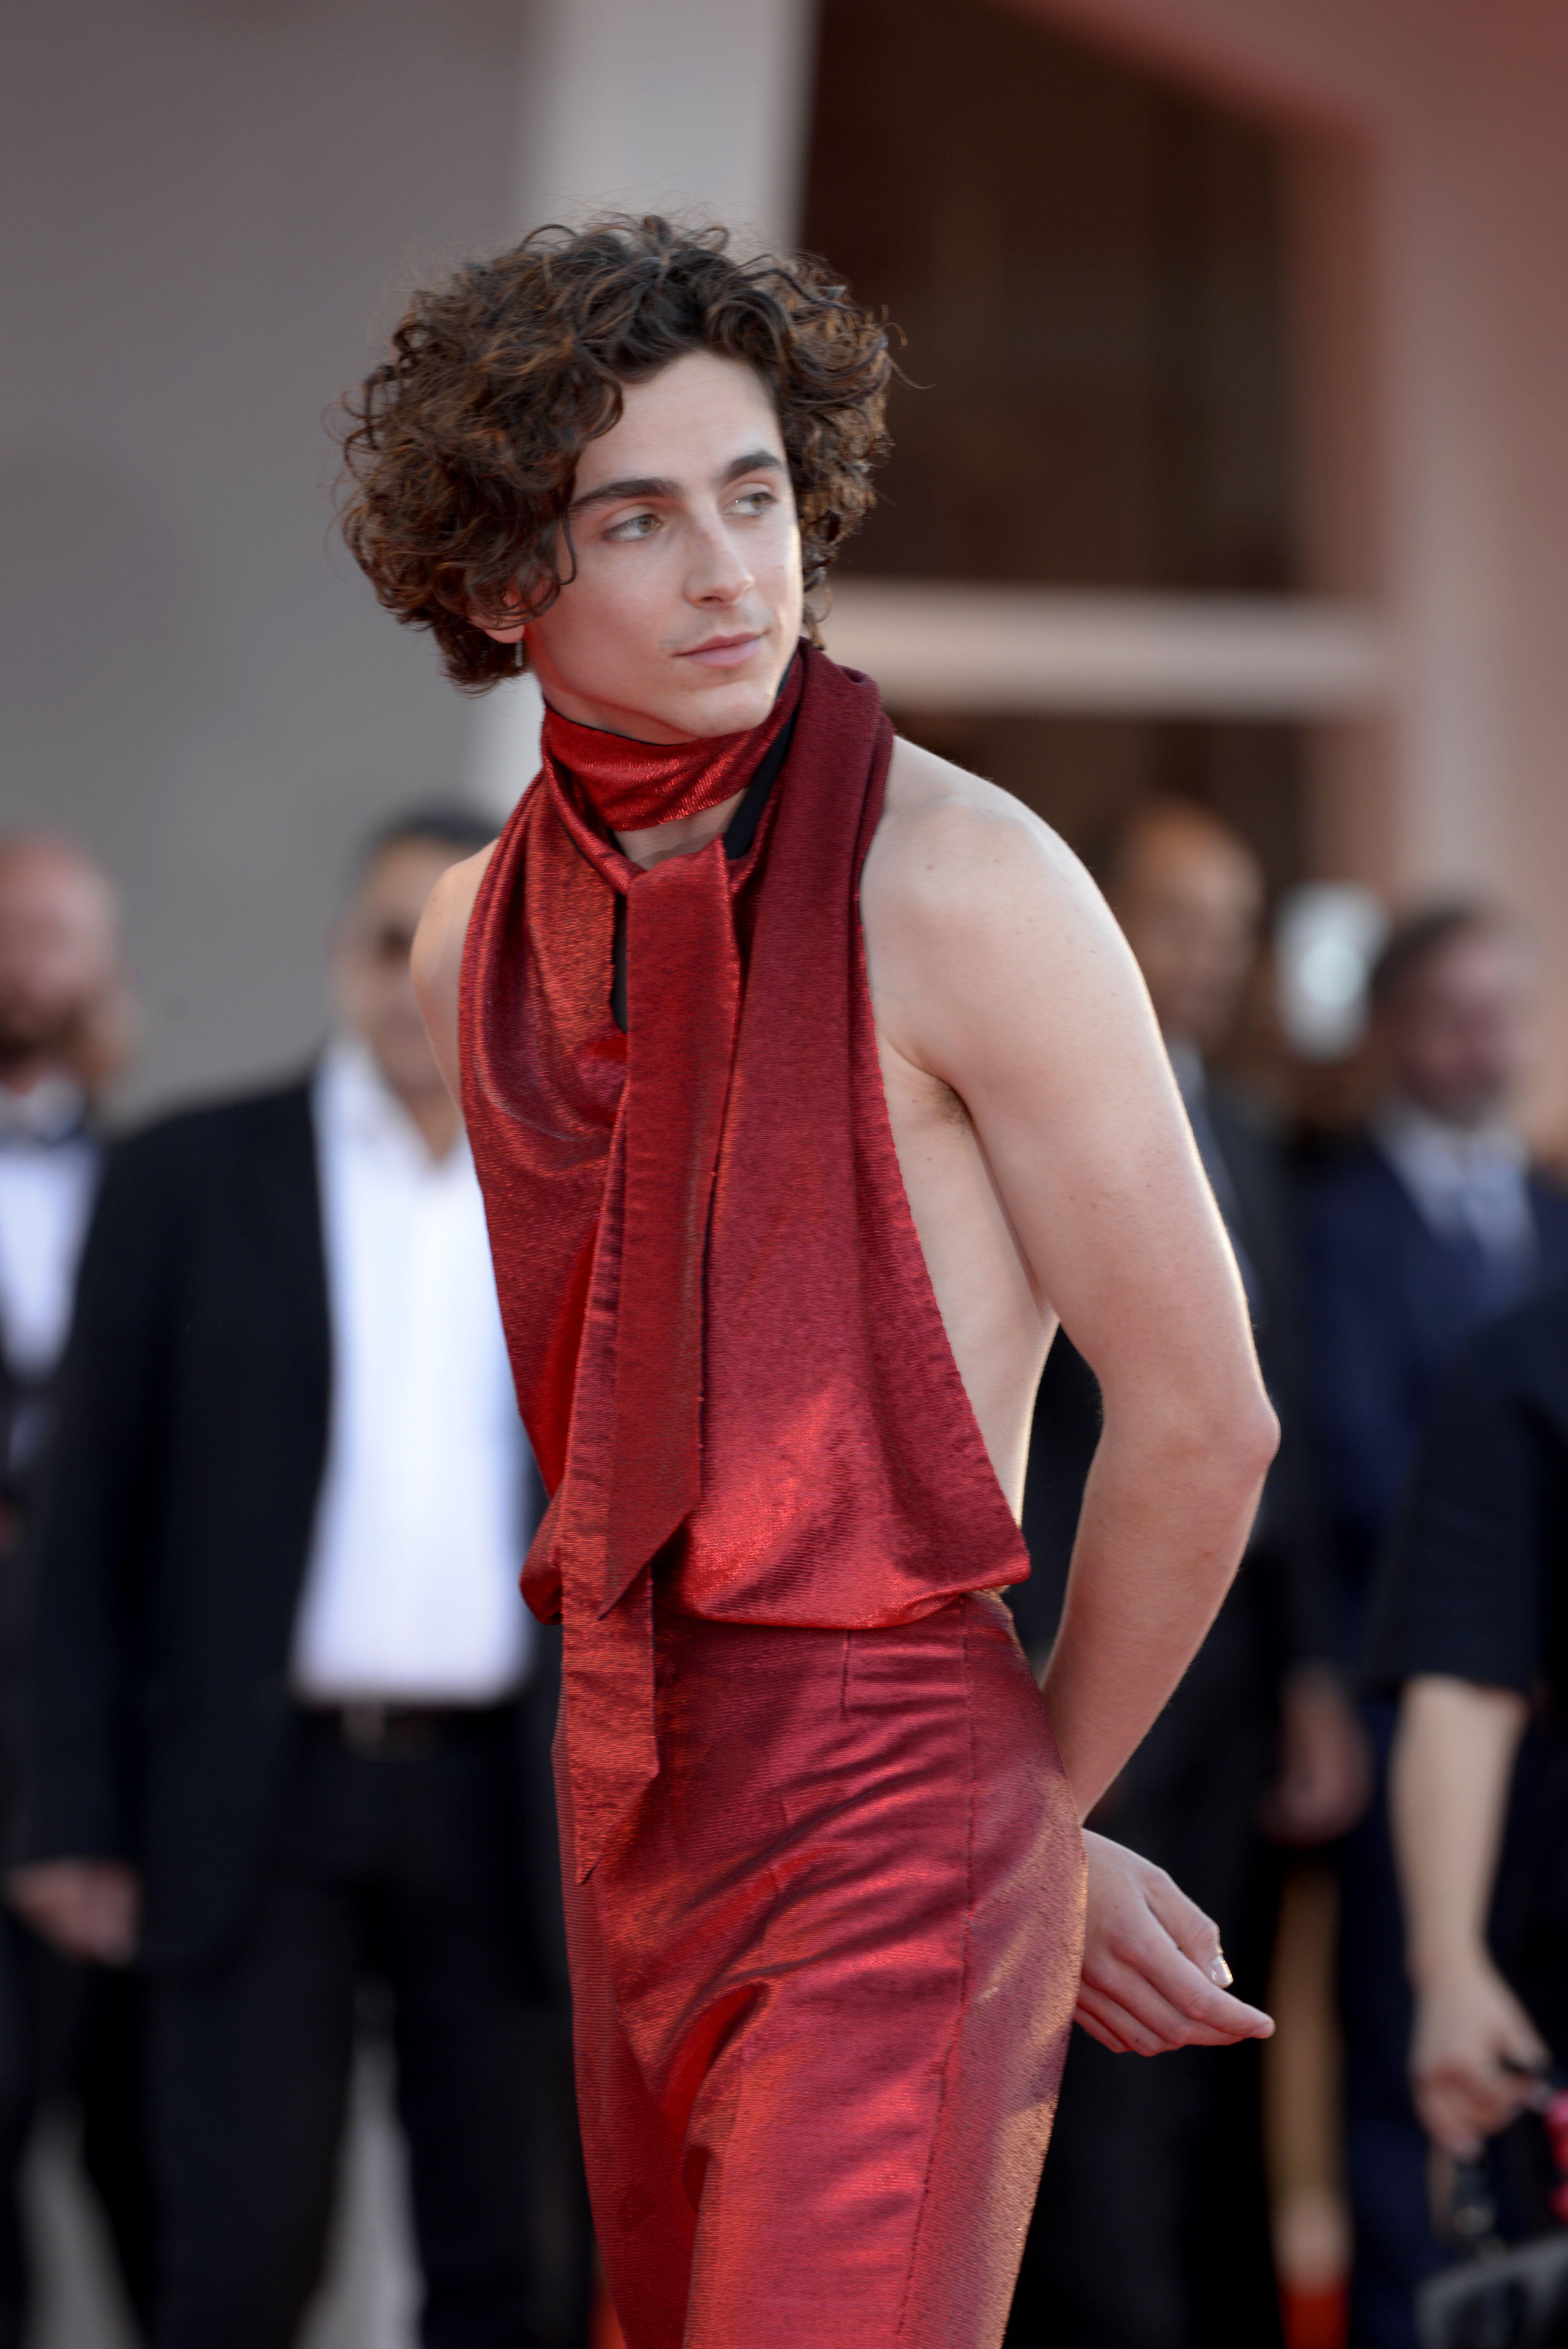 Timothée Chalamet Wore a Shimmery Halter Top to the 'Bones And All